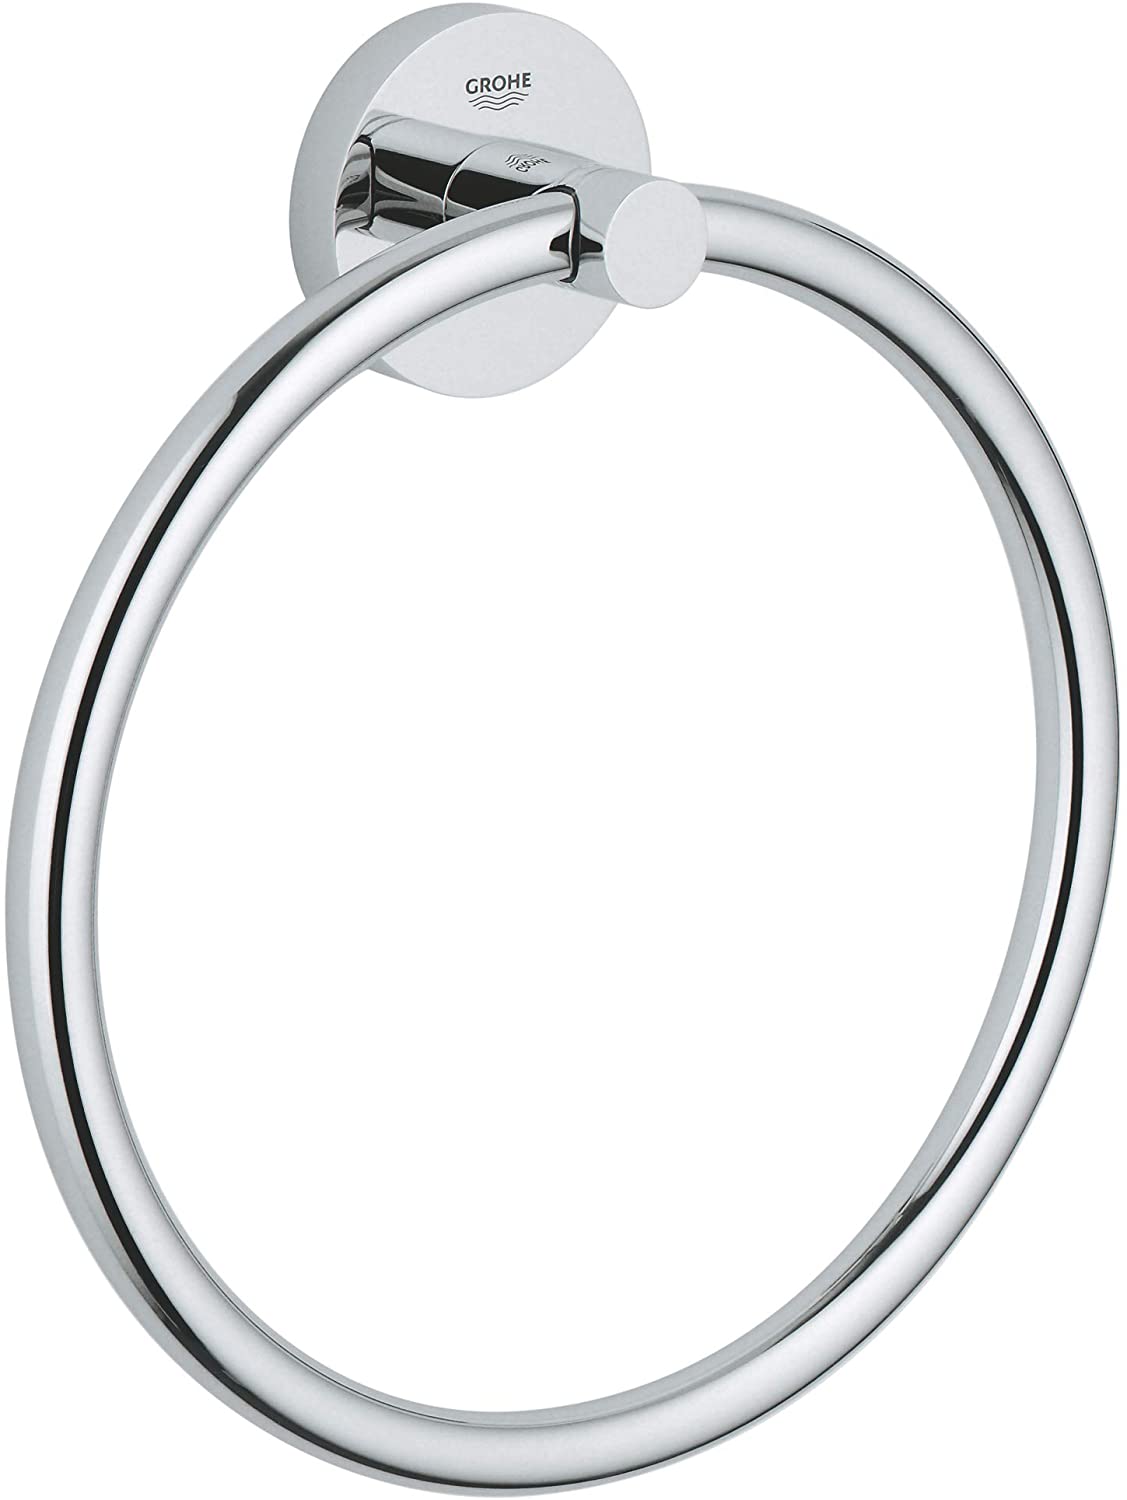 GROHE Essentials Towel Ring Silver